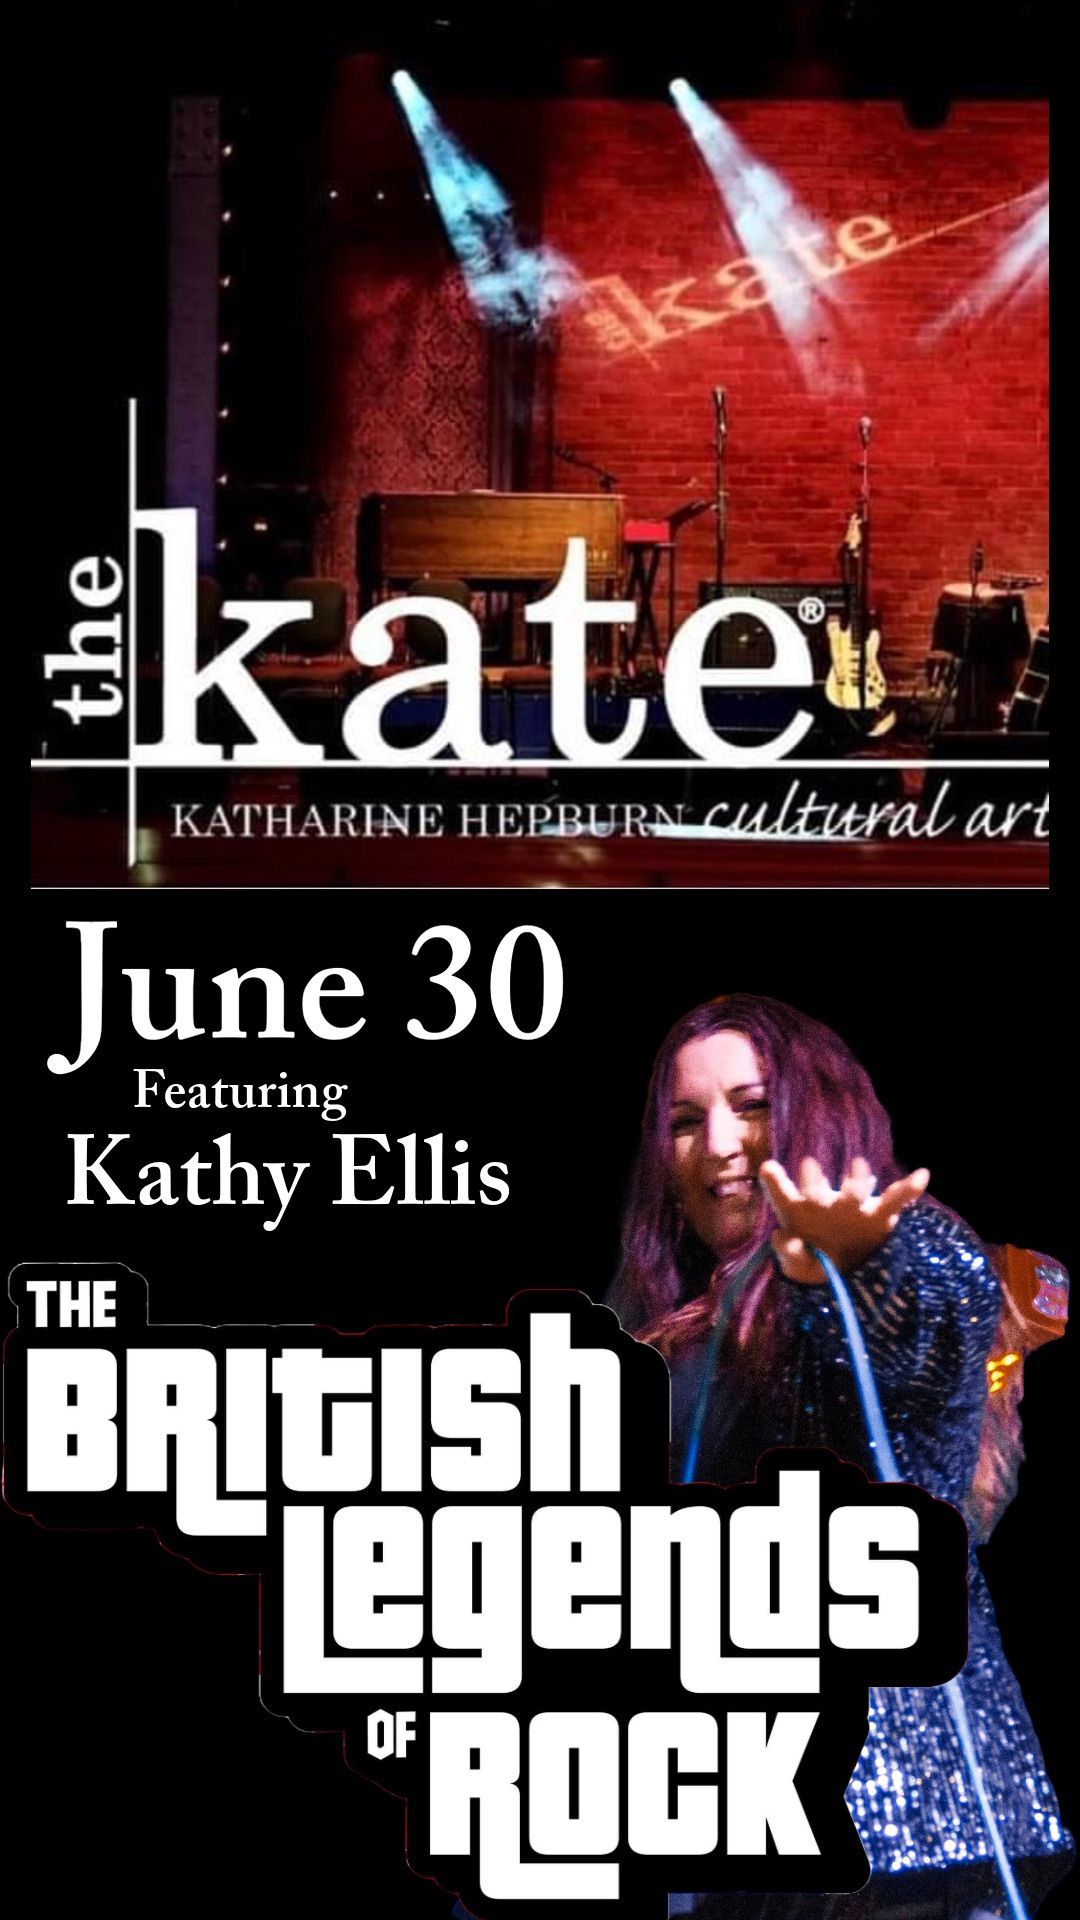 The British Legends of Rock @ The Kate featuring Kathy Ellis